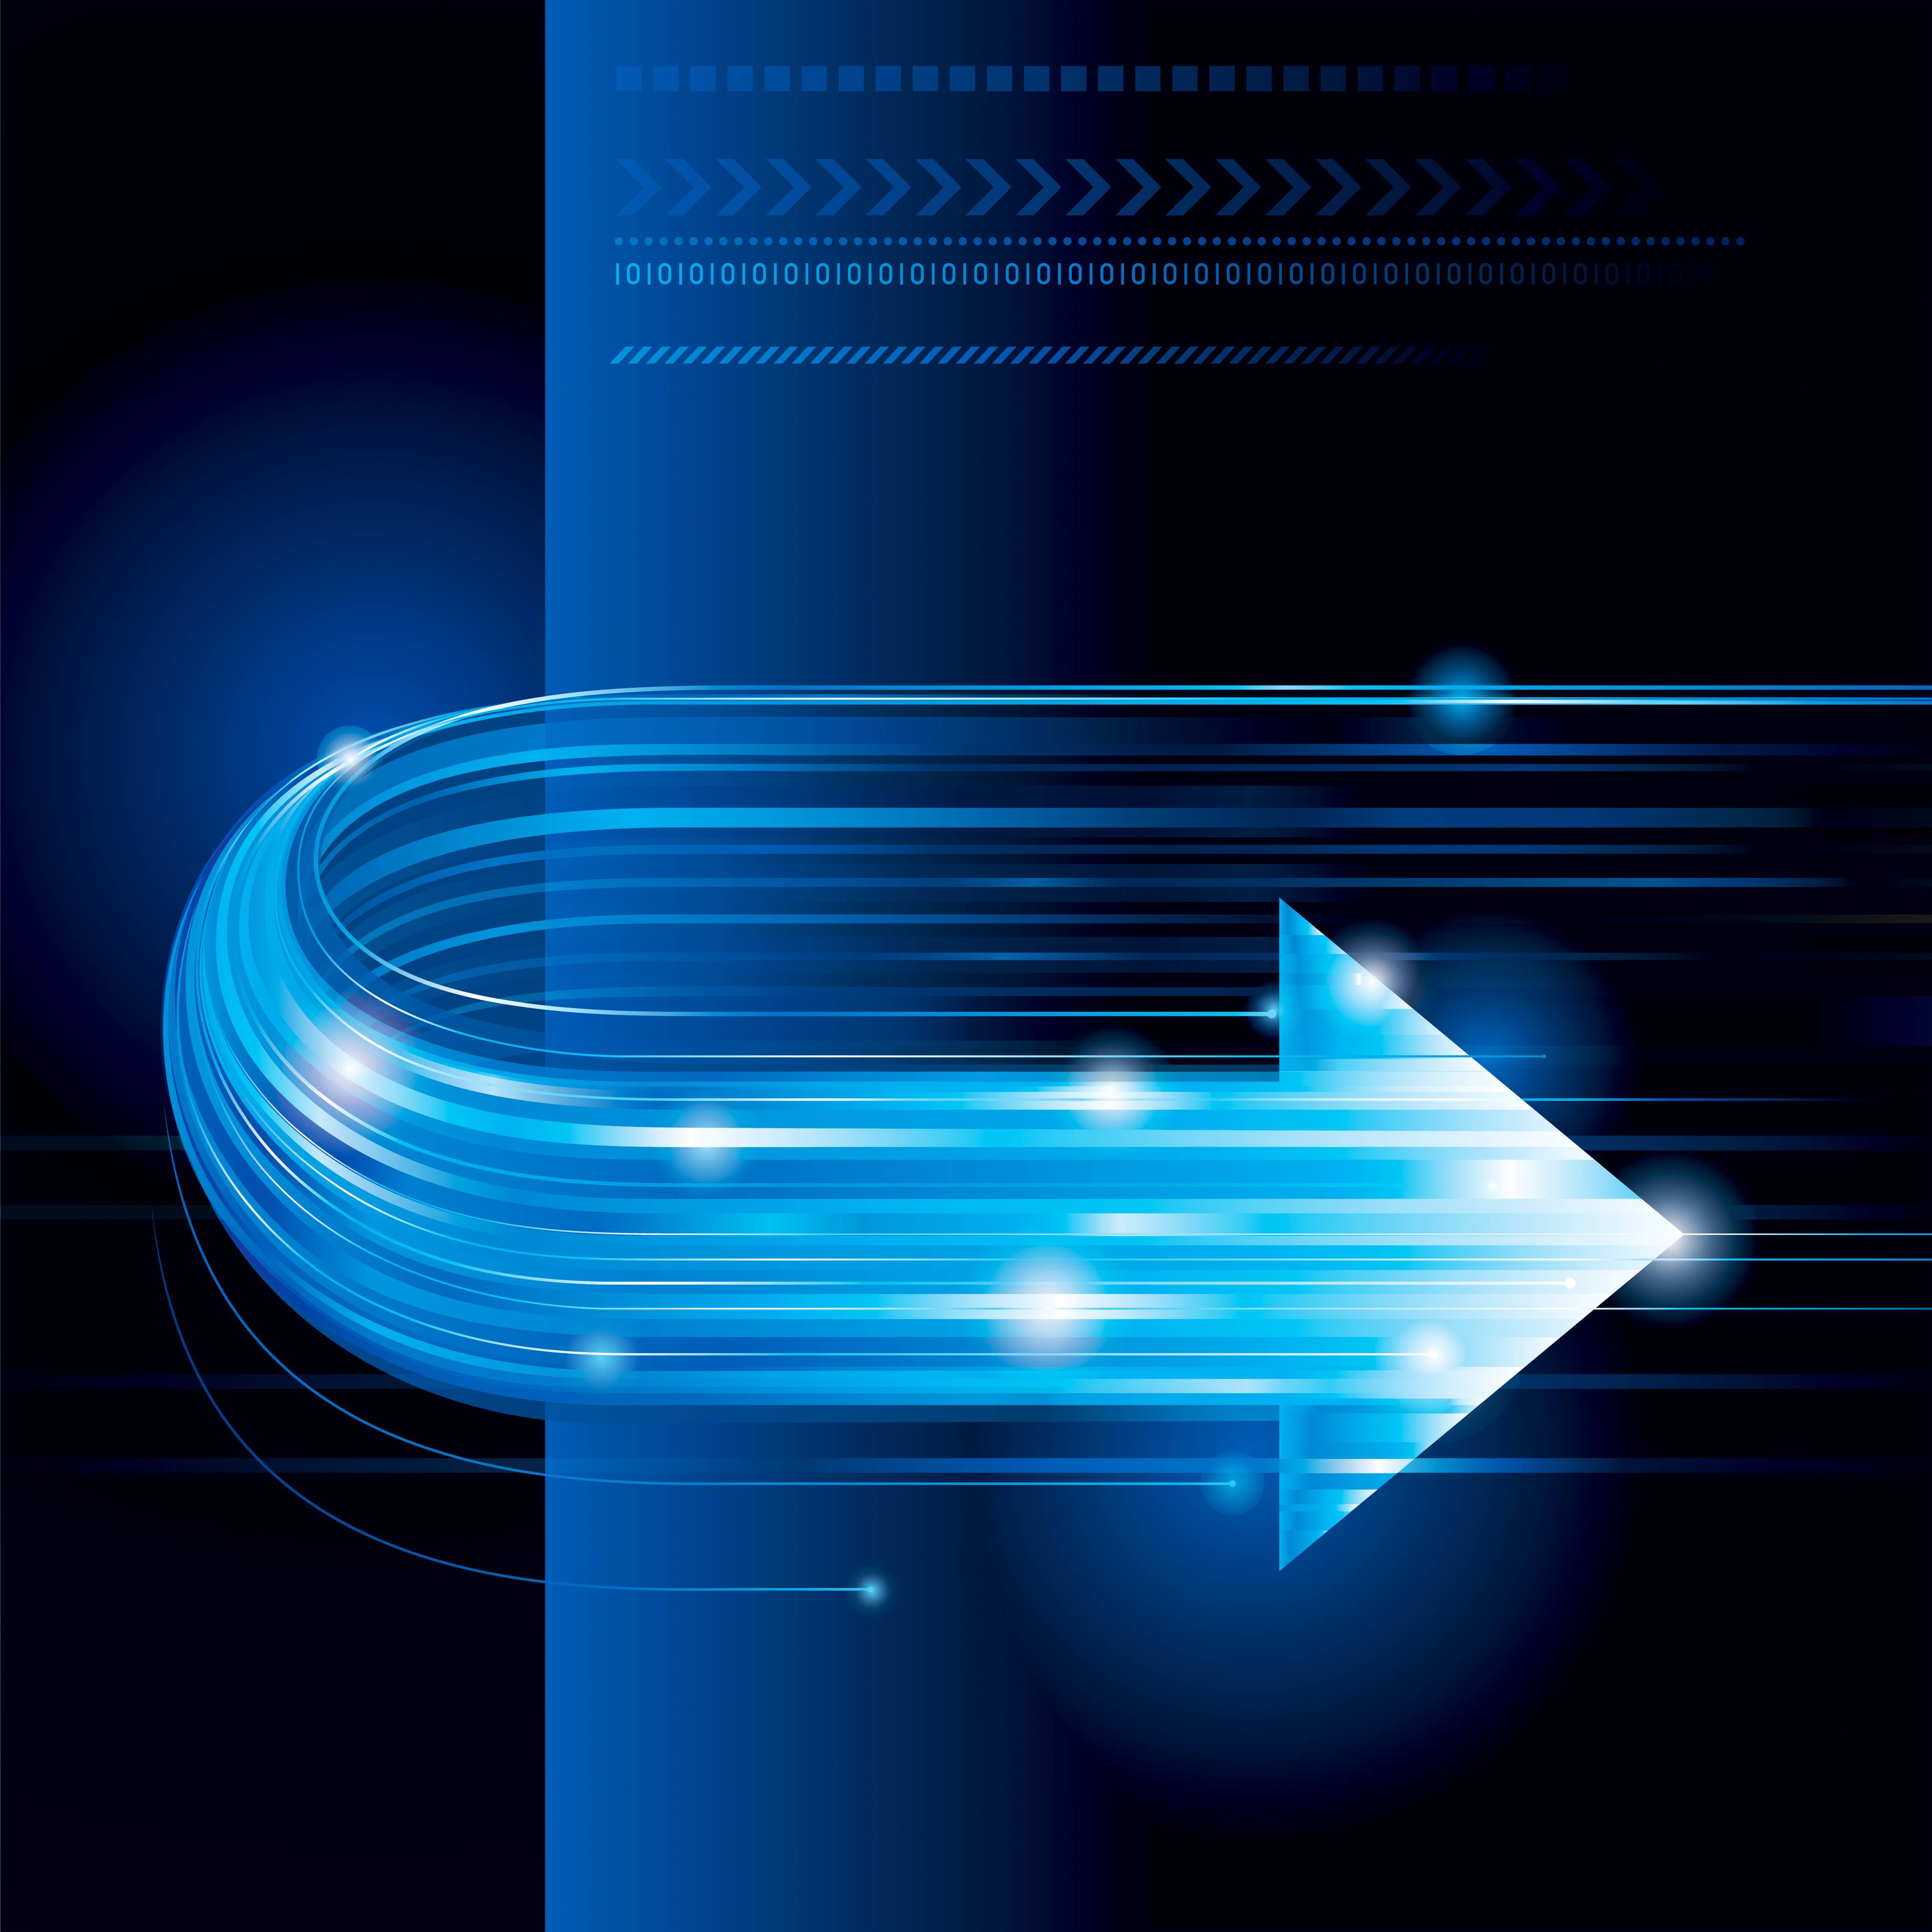 Abstract technology background with arrow shape